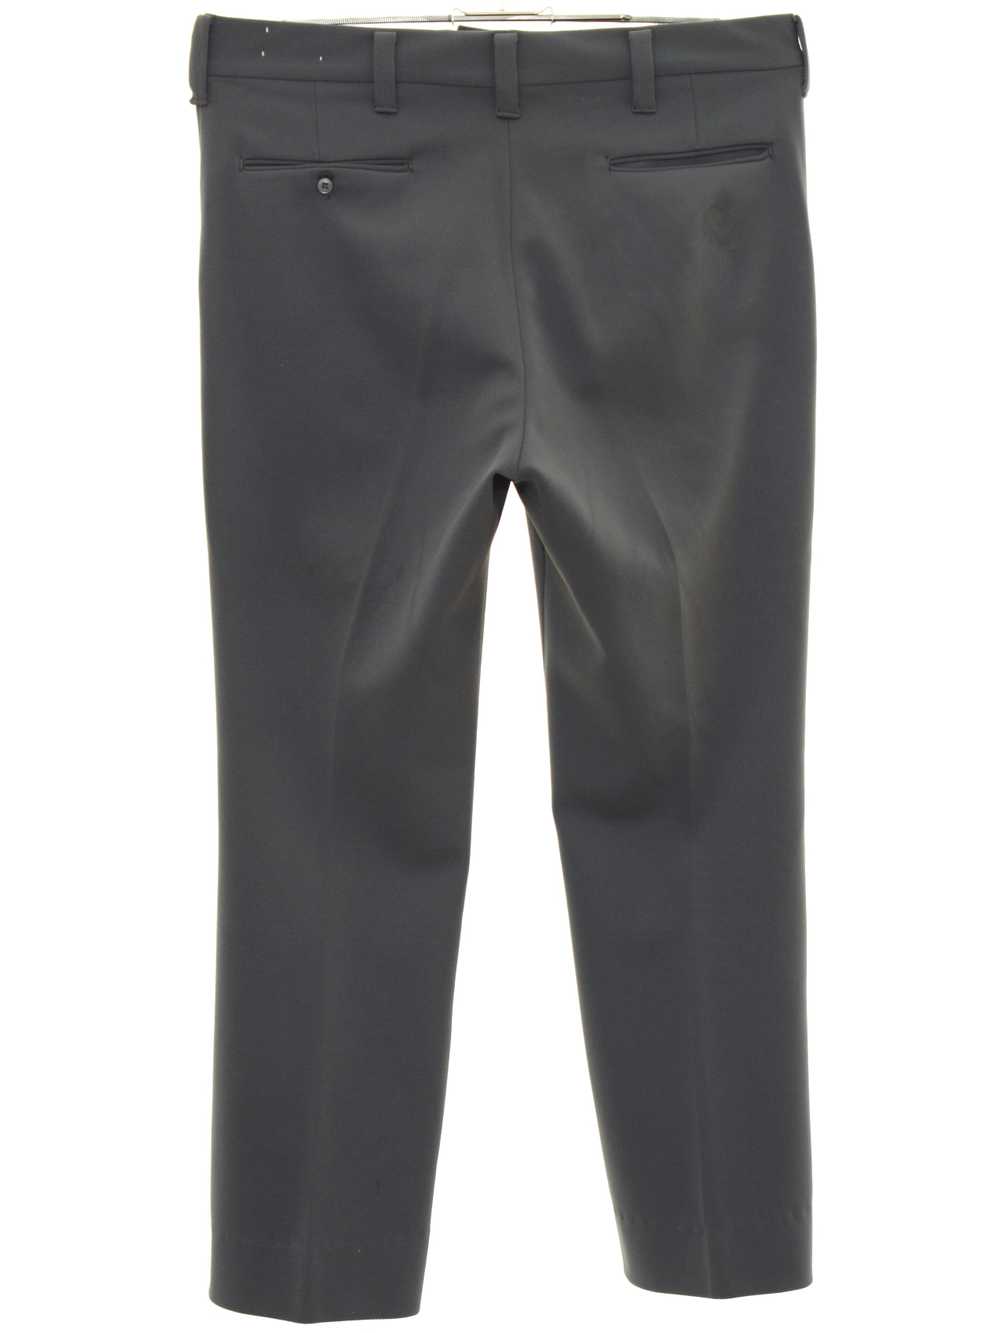 1970's Mens Flared Leisure Pants - image 3